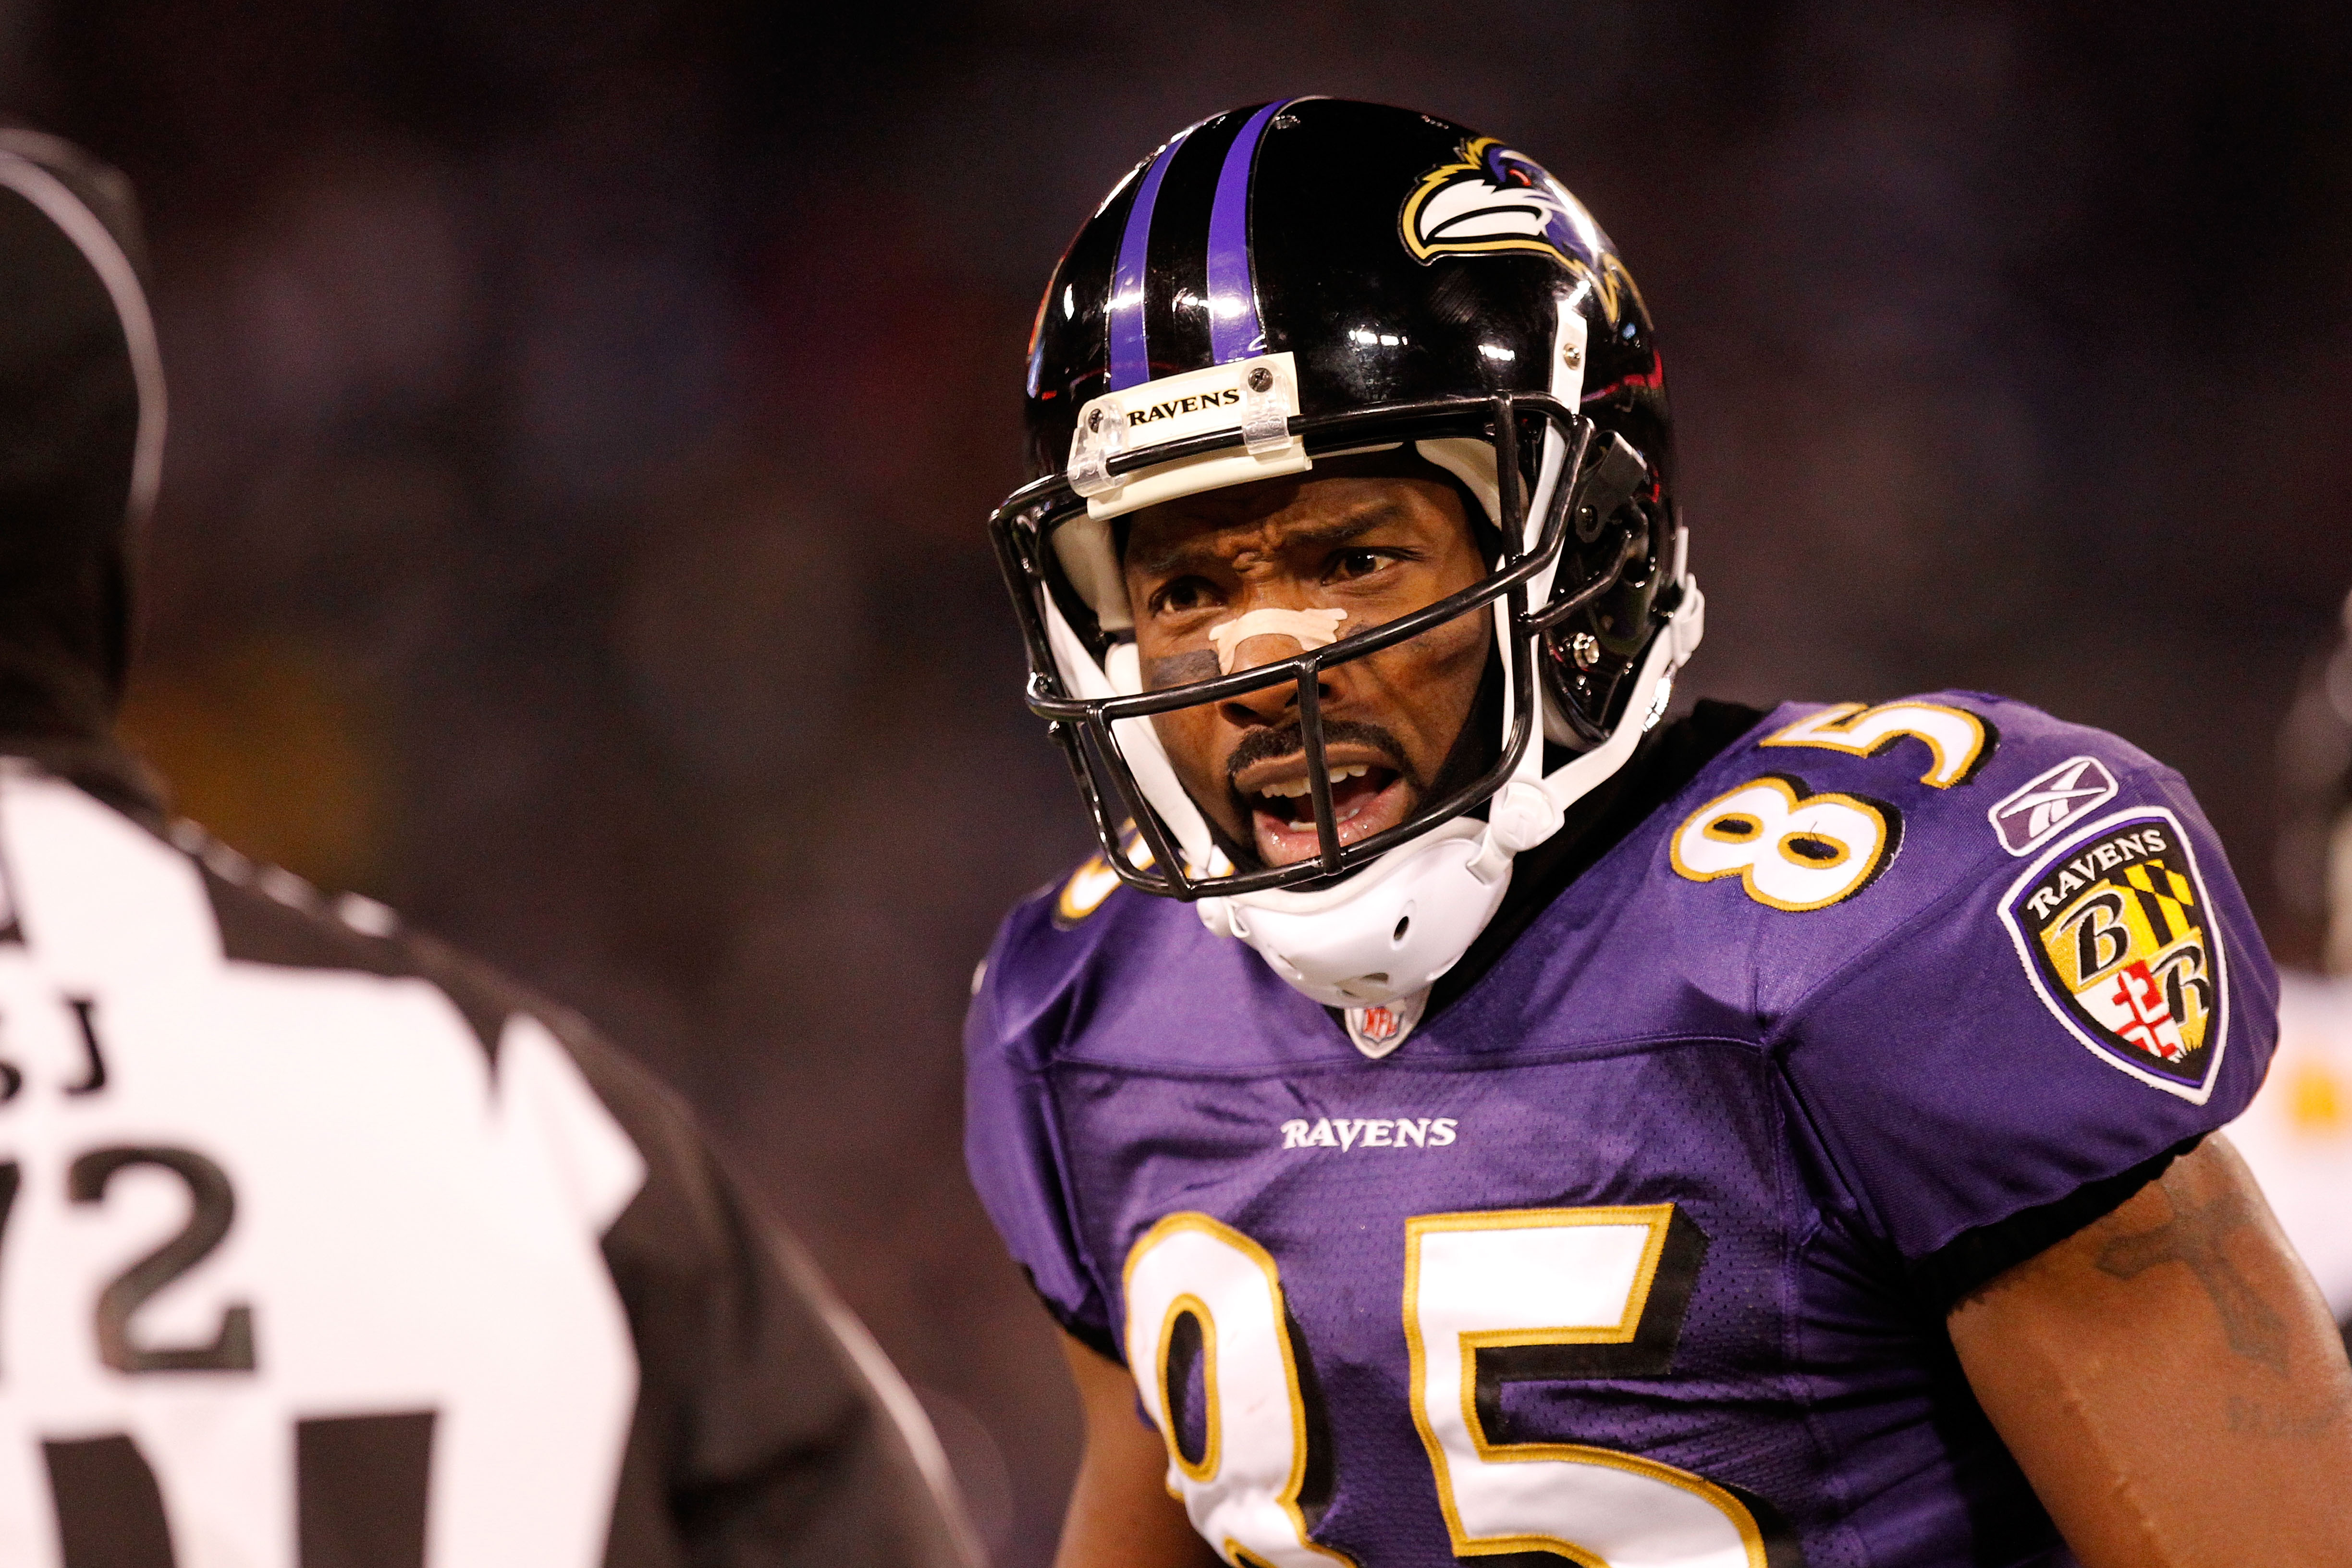 BALTIMORE, MD - DECEMBER 05:  Derrick Mason #85 of the Baltimore Ravens argues a call with a referee during the game against the Pittsburgh Steelers at M&T Bank Stadium on December 5, 2010 in Baltimore, Maryland. Pittsburgh won 13-10.  (Photo by Geoff Bur